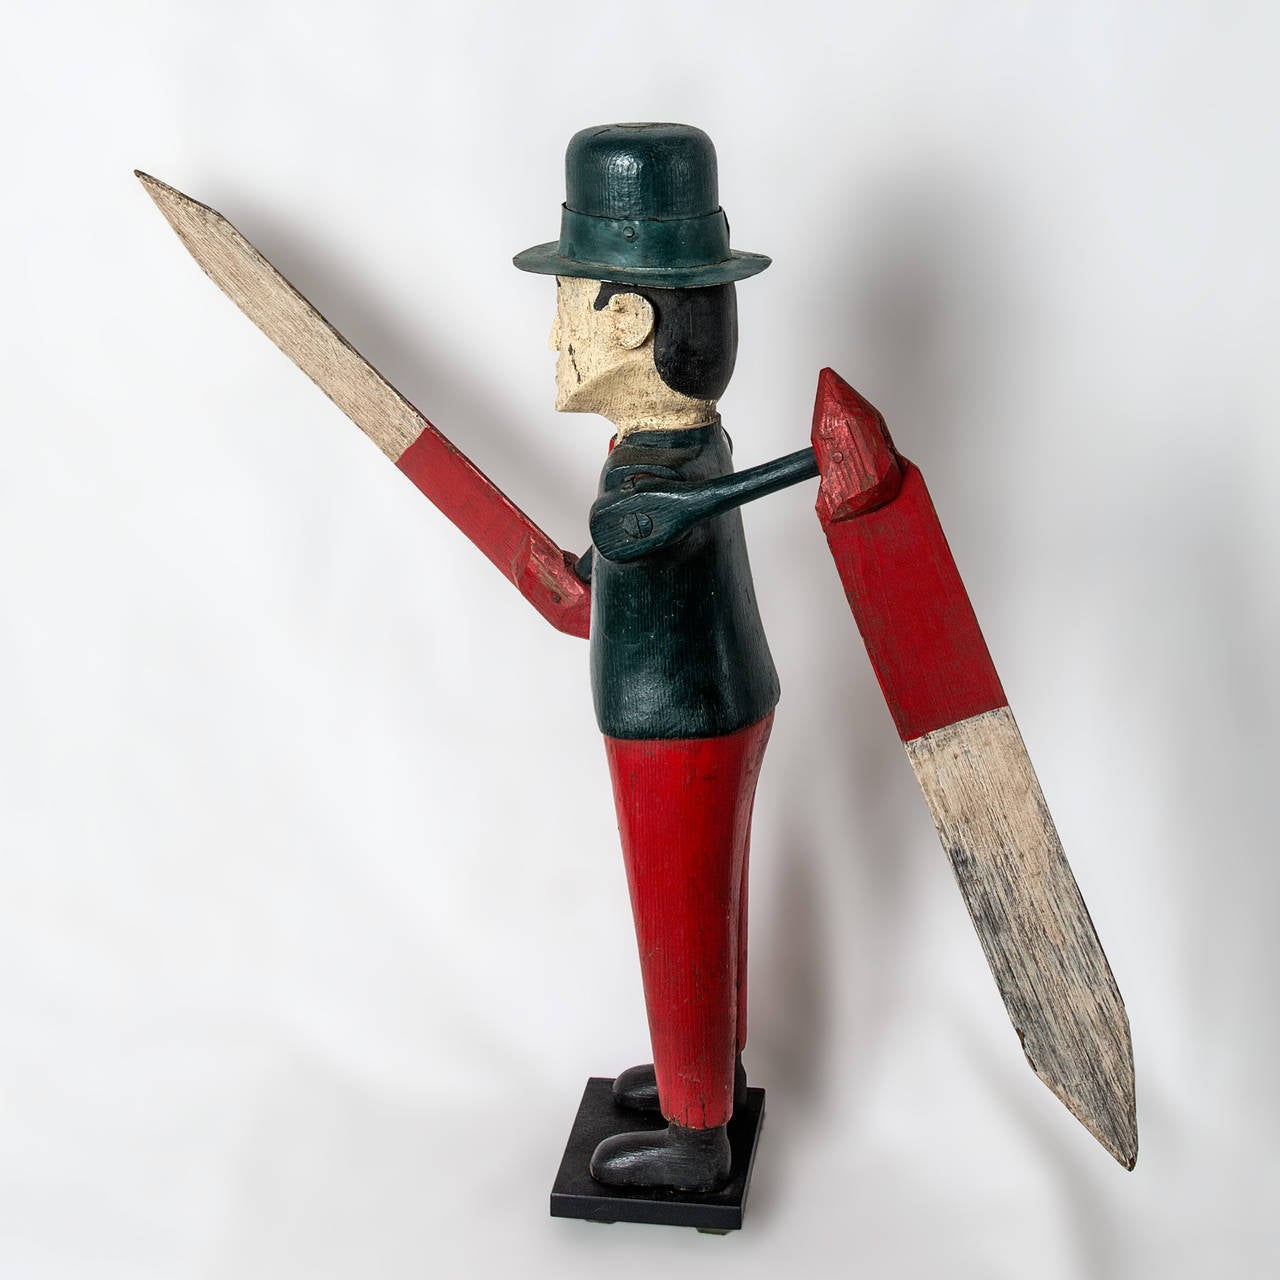 A patriotic whirligig, folksy figural carving of a man dressed in a blue jacket, red trousers, wearing a blue brimmed top hat. Painted red and white arrow style paddles.